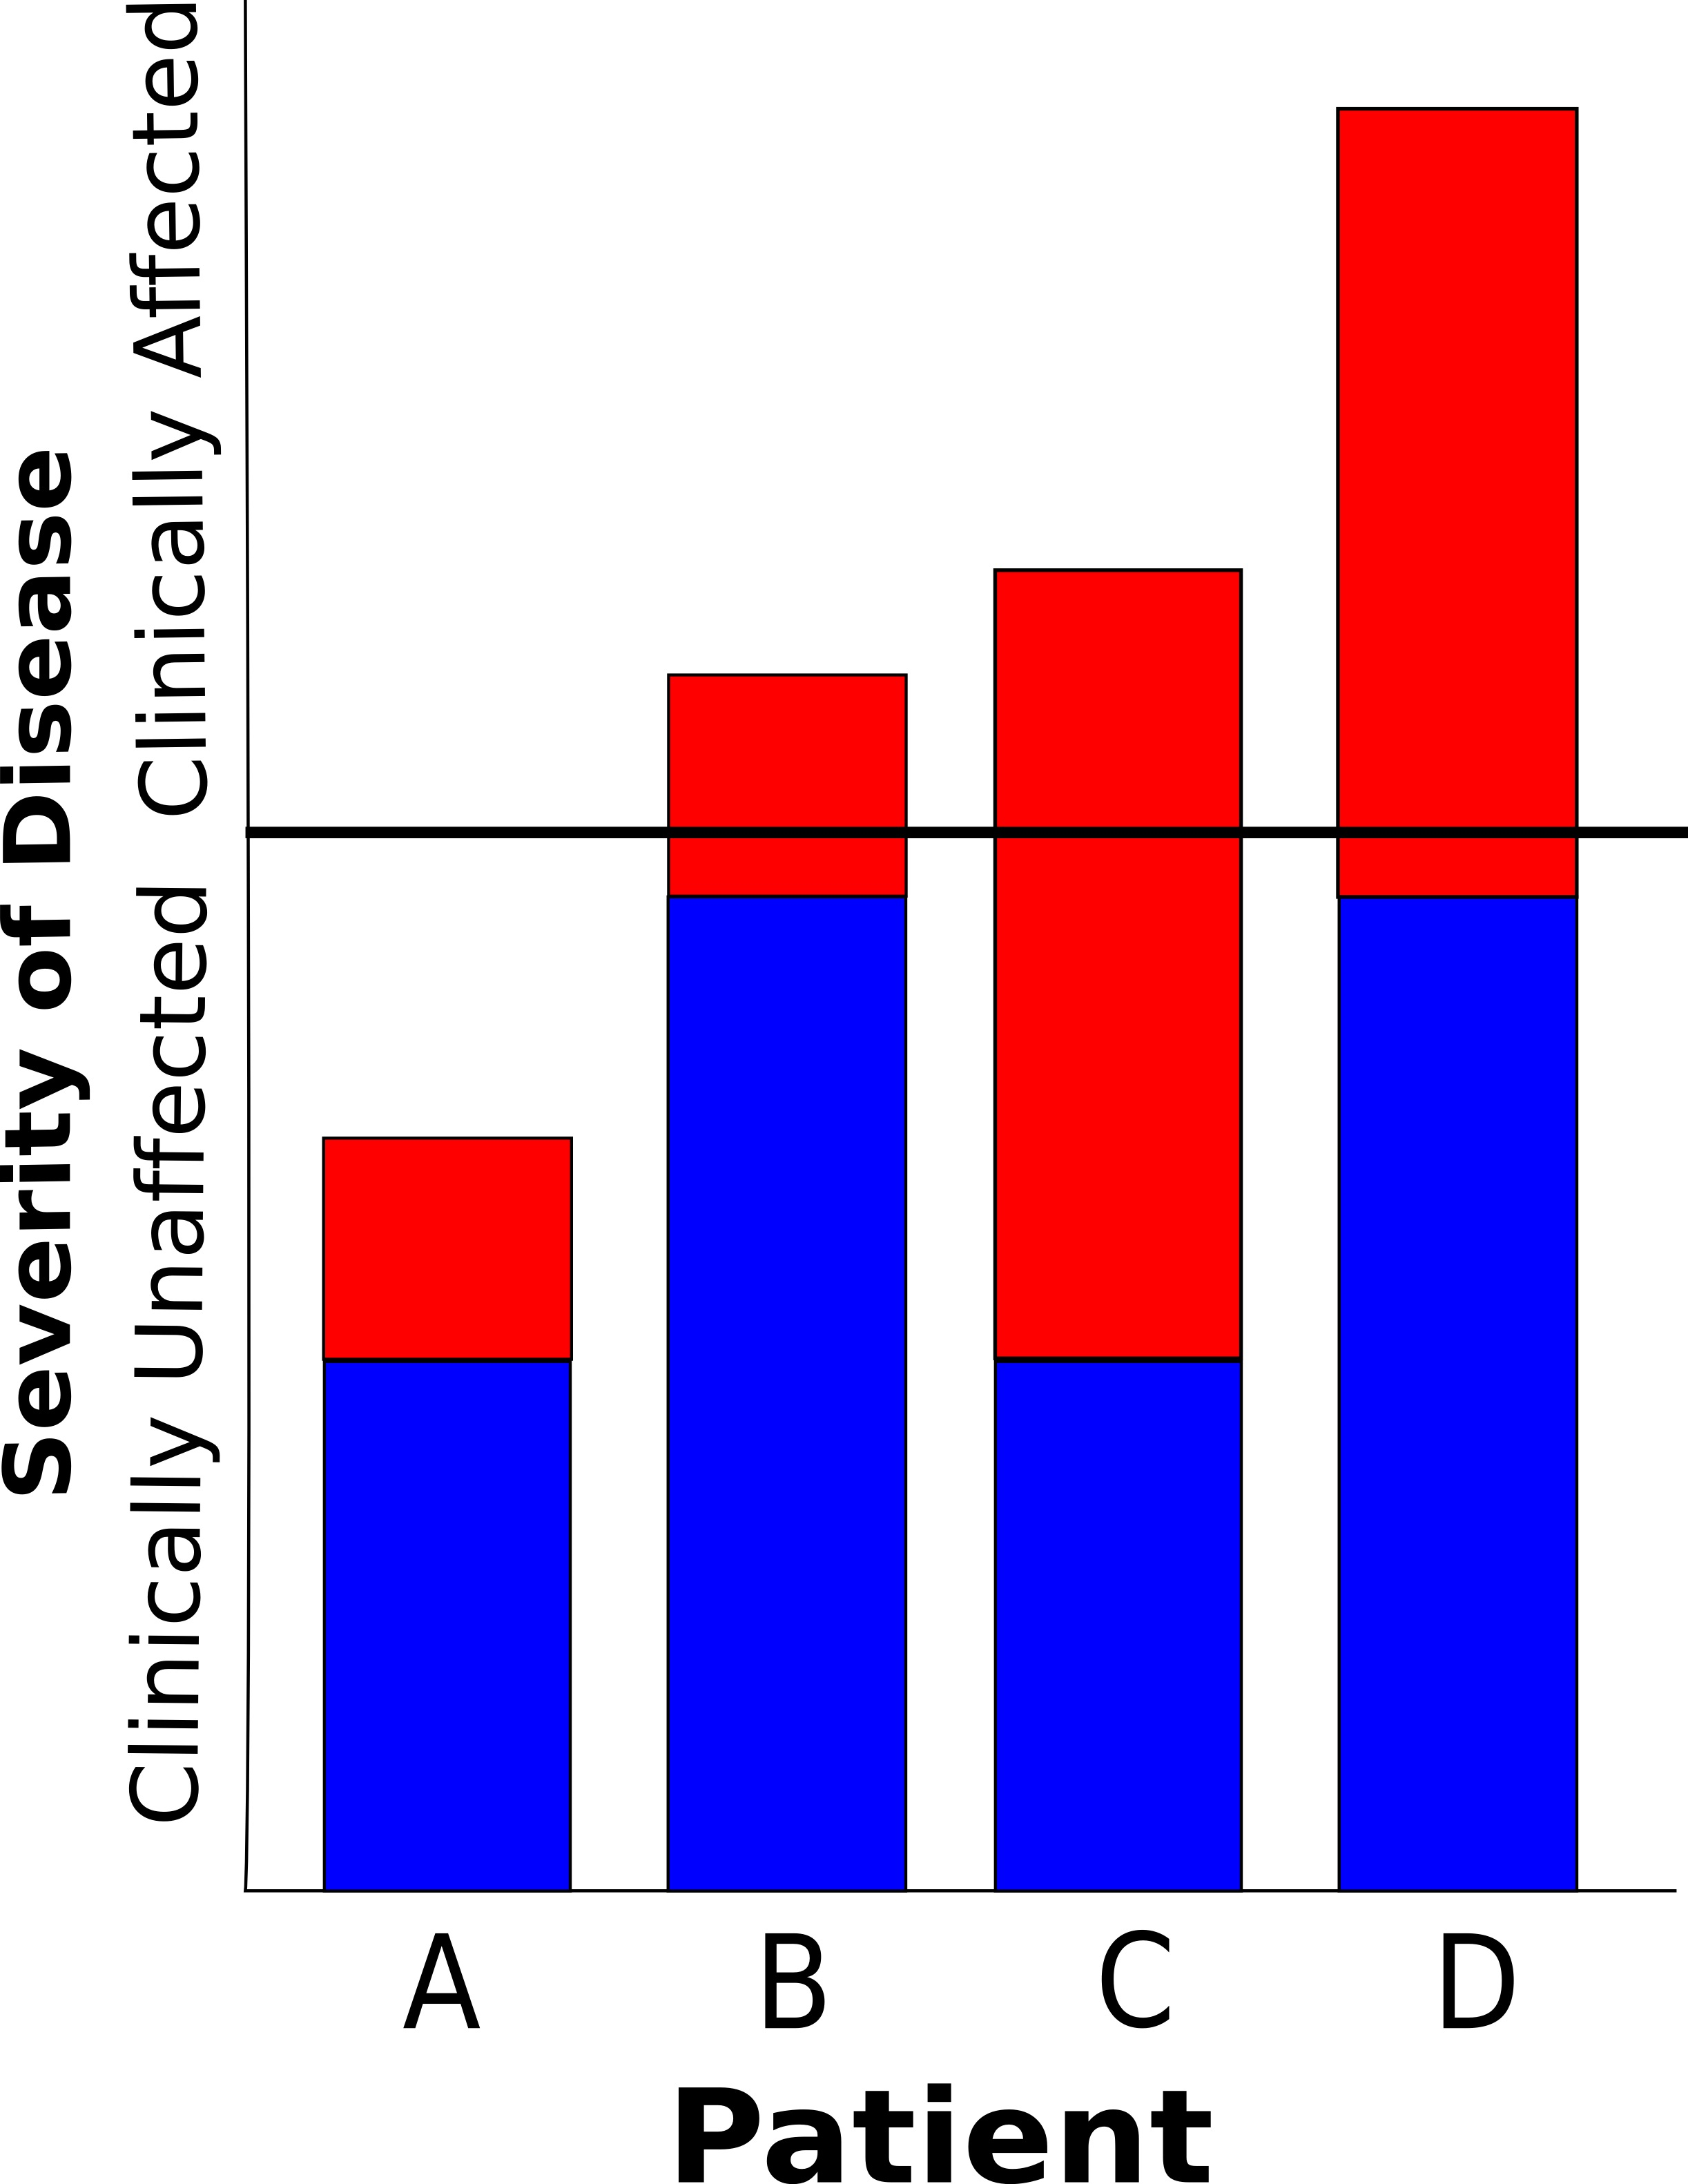 Figure 2: The threshold model of genetic predisposition to complex disease. Blue boxes represent genetic predisposition, and red boxes represent environmental predisposition. The horizontal black line represents a threshold, below which the individual is clinically unaffected. Patient A has a low genetic predisposition and low environmental exposure, and does not have the disease. Patient B has a large genetic predisposition, and a low environmental exposure is enough for them to exceed the threshold and be clinically affected. Patient C has a low genetic predisposition, but a large environmental exposure, and is also clinically affected. Finally, Patient D has a large genetic and environmental exposure, and is more severely affected.